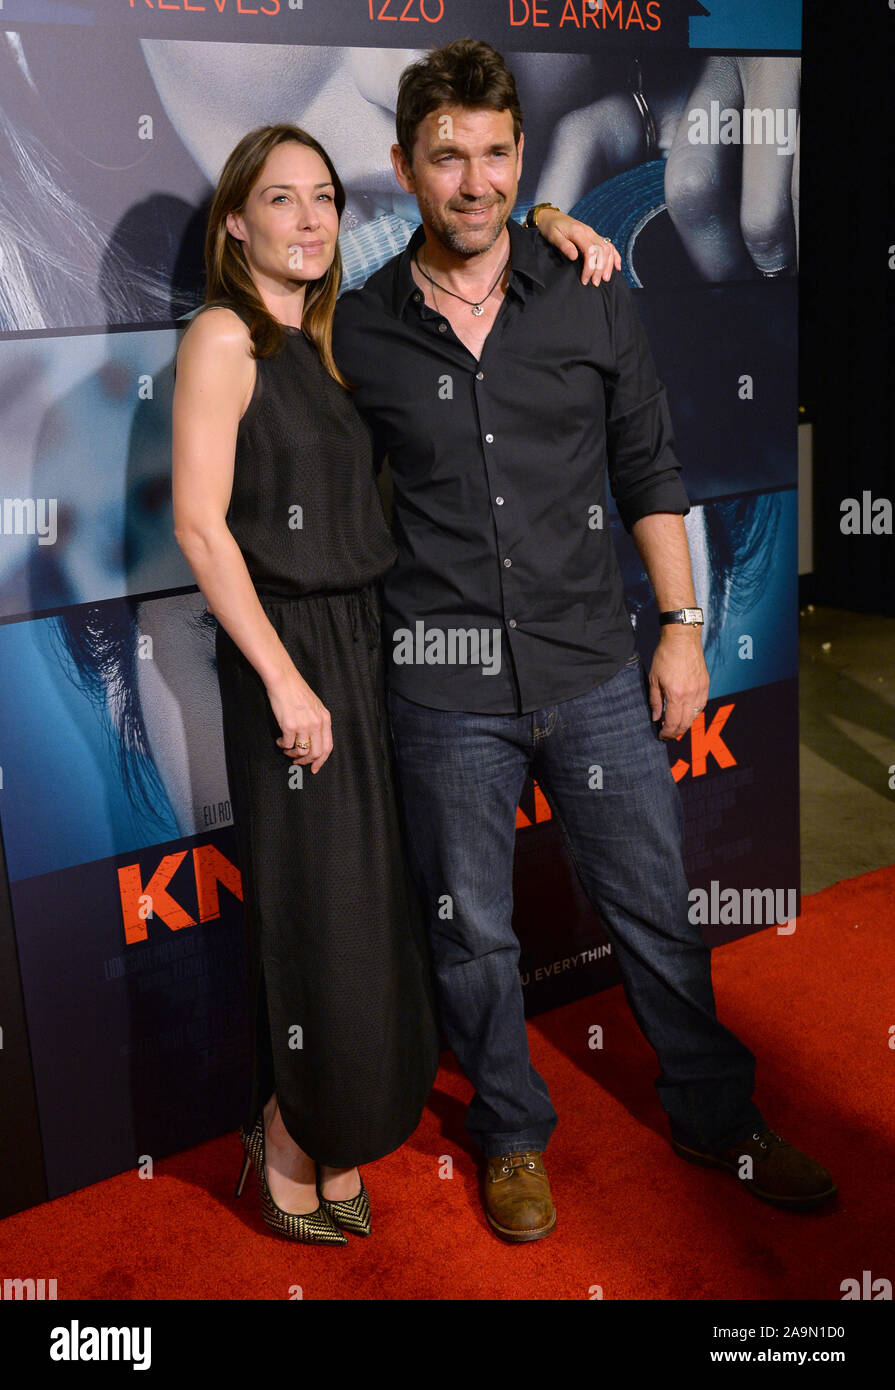 LOS ANGELES, CA - OCTOBER 7, 2015: Actress Claire Forlani husband actor Dougray Scott at the Los Angeles premiere of  'Knock Knock' at the TCL Chinese Theatre, Hollywood. © 2015 Paul Smith / Featureflash Stock Photo